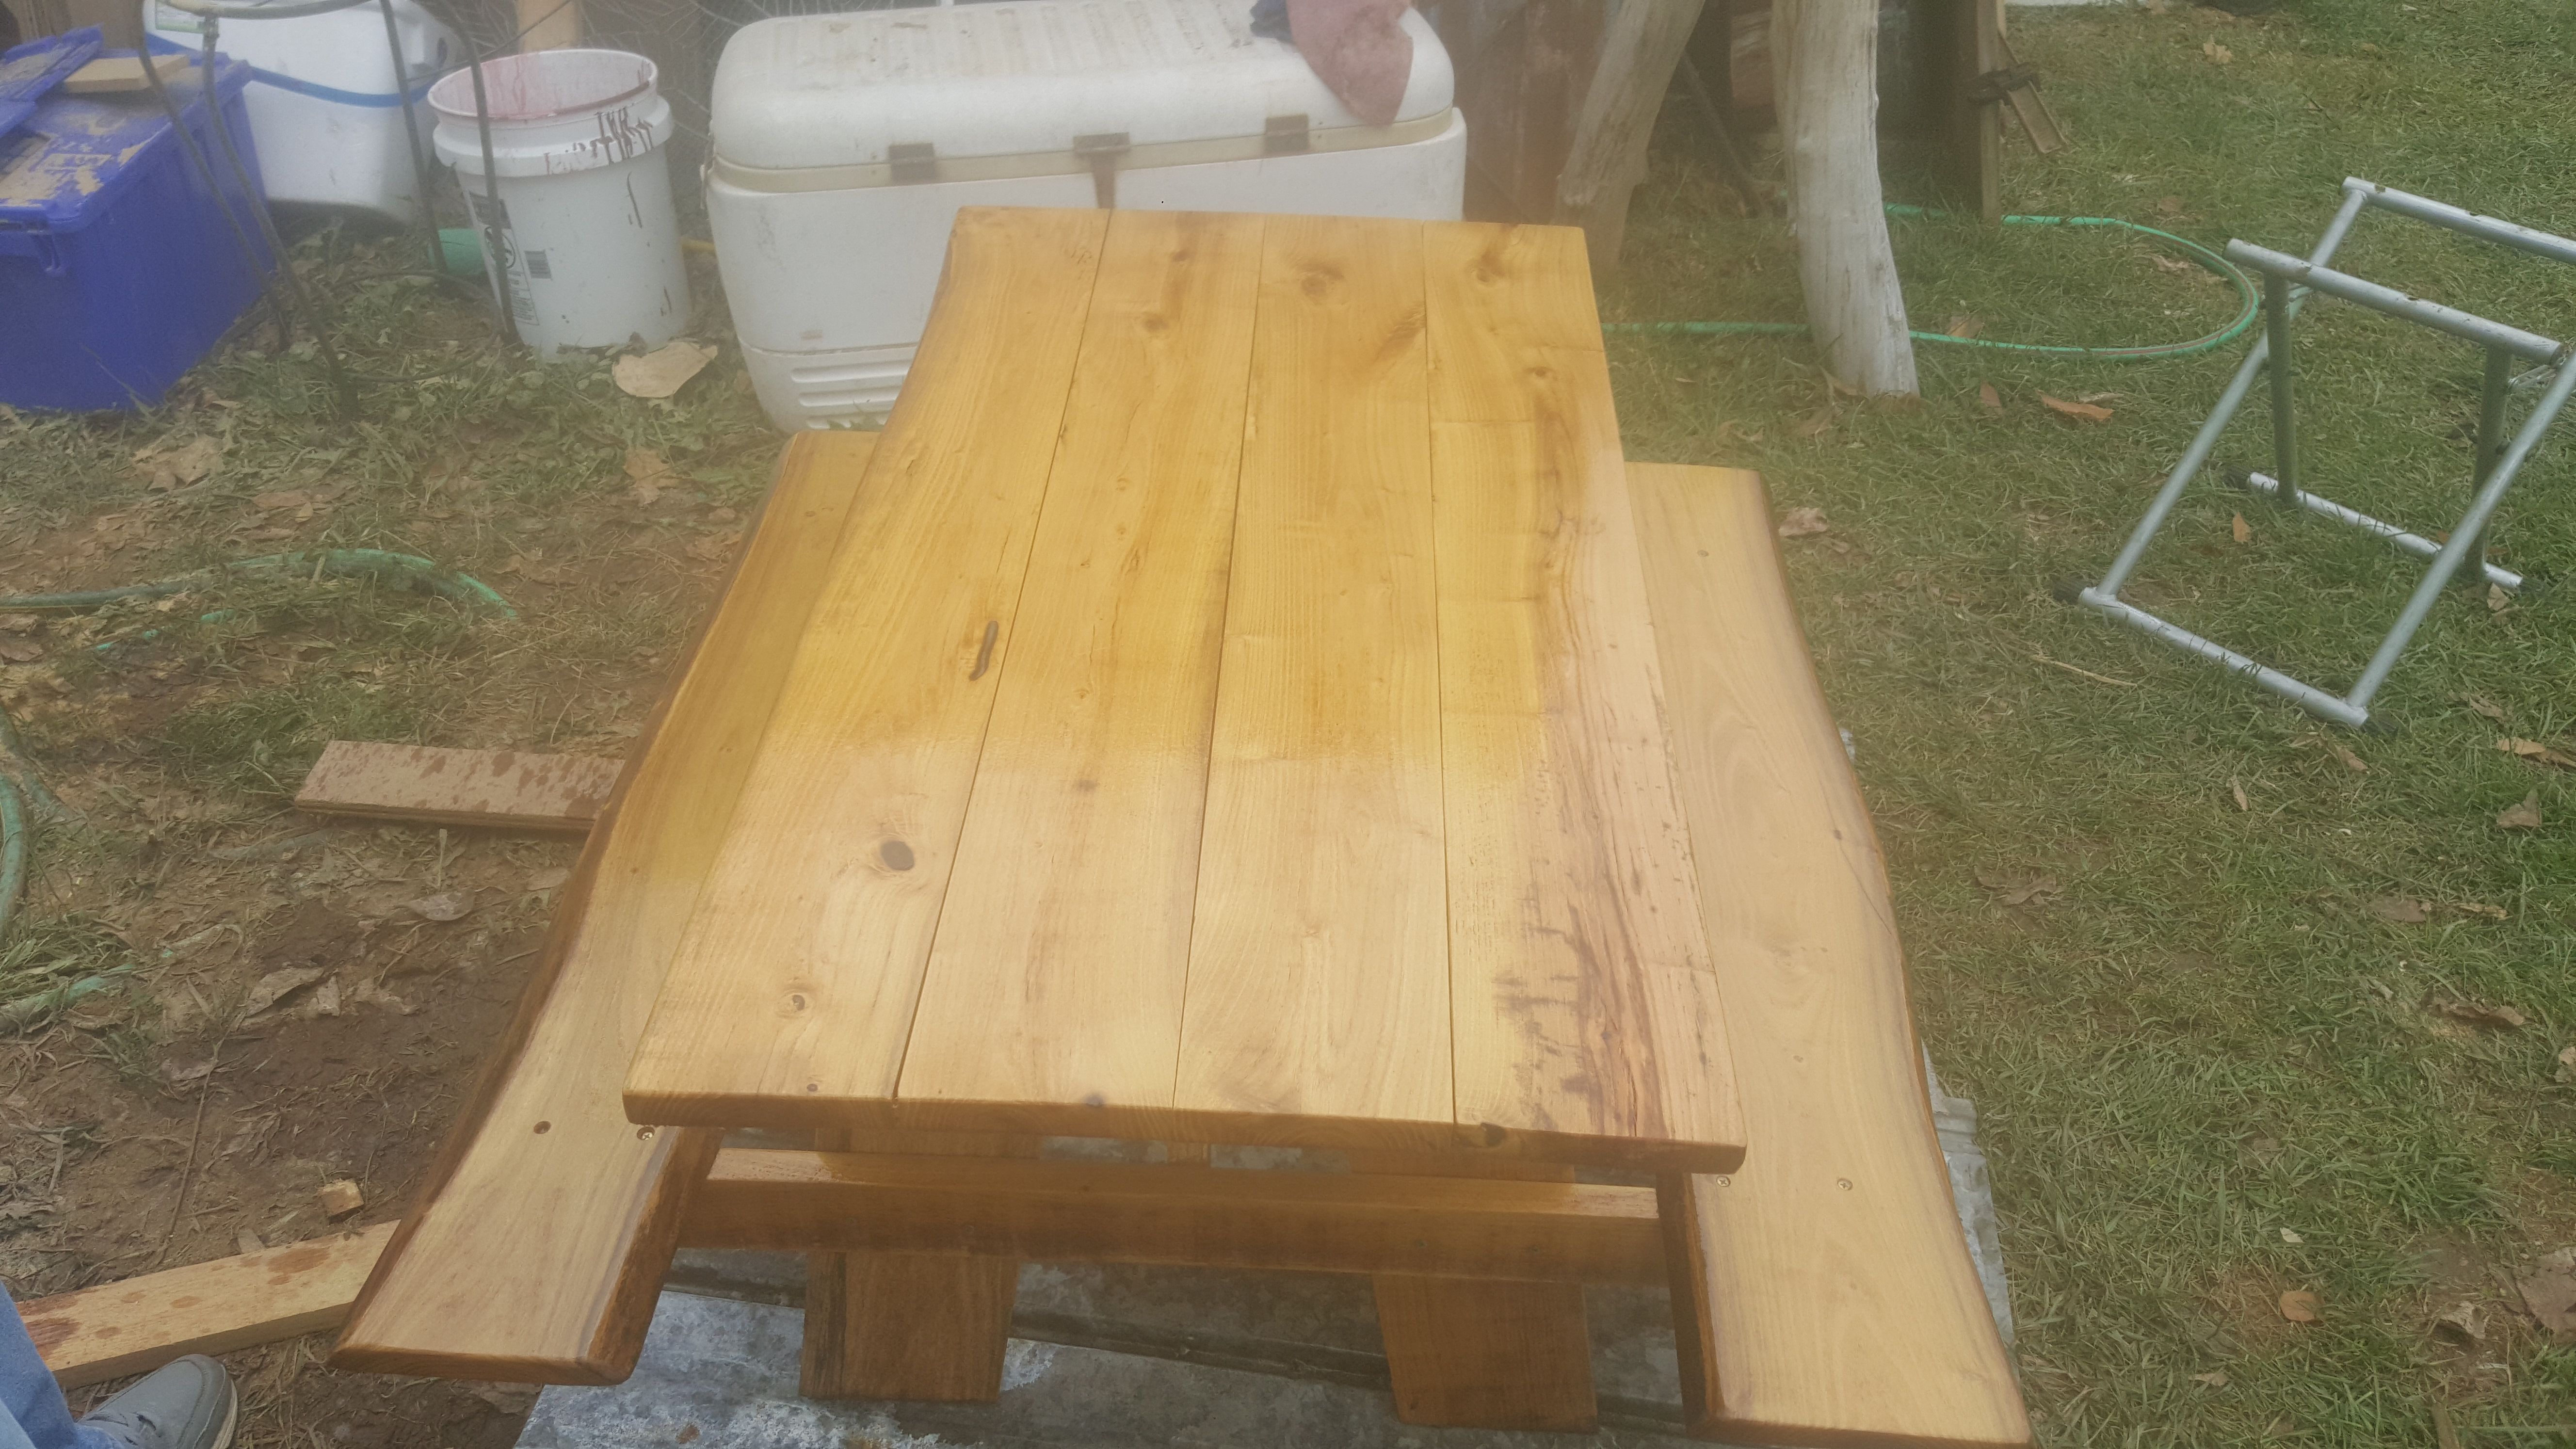 Kid size picnic table